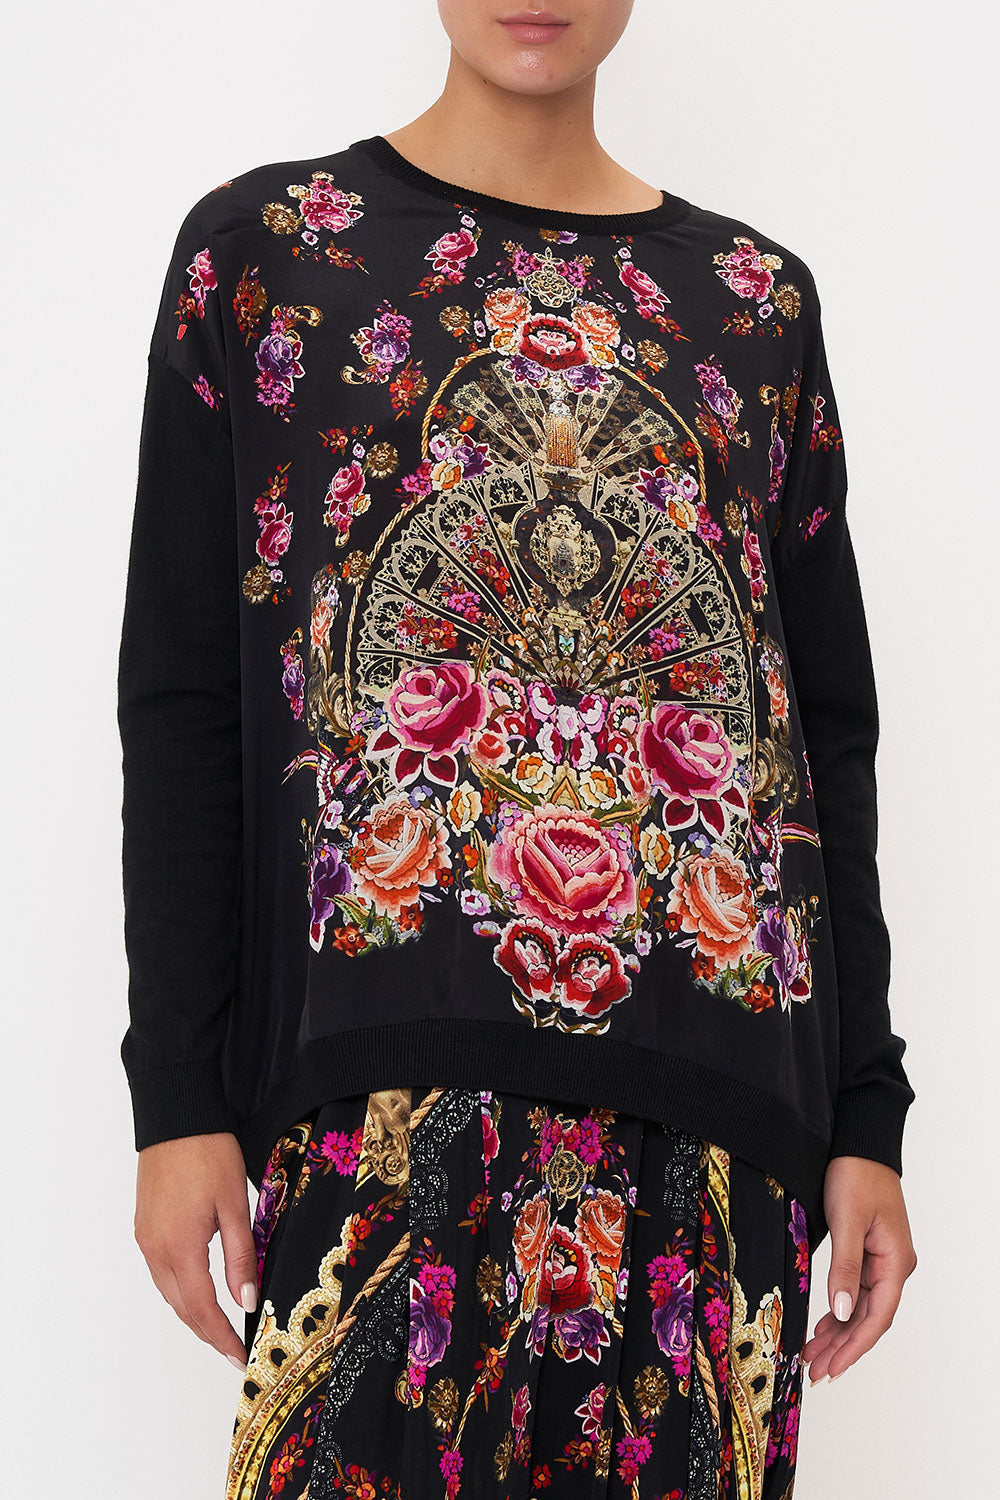 LONG SLEEVE JUMPER WITH PRINT FRONT DANCE WITH DUENDE